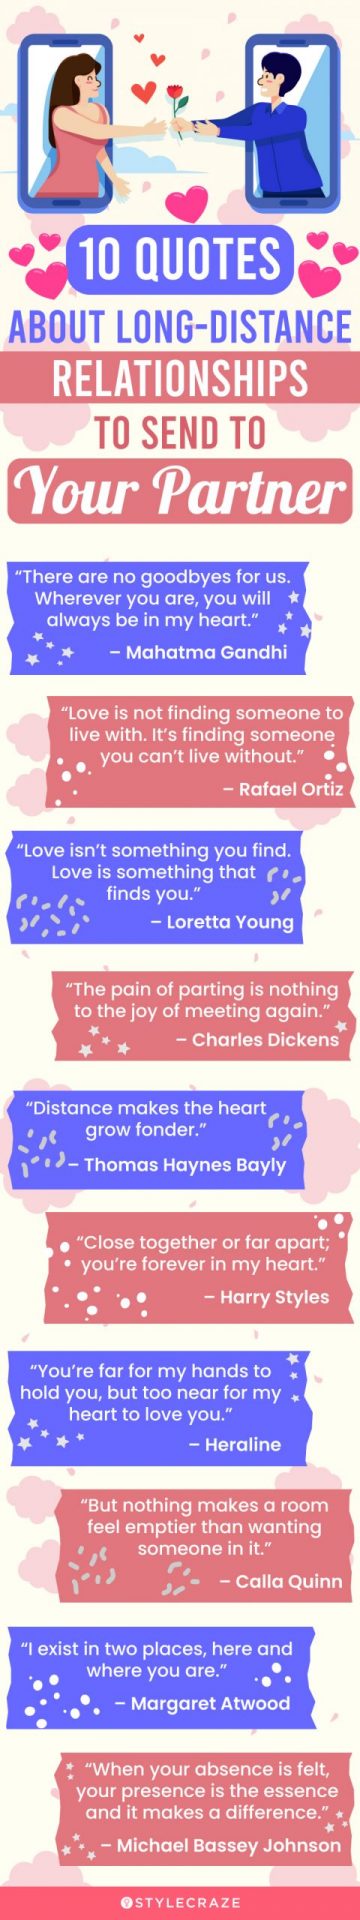 10 quotes about long distance relationships to send to your partner (infographic)